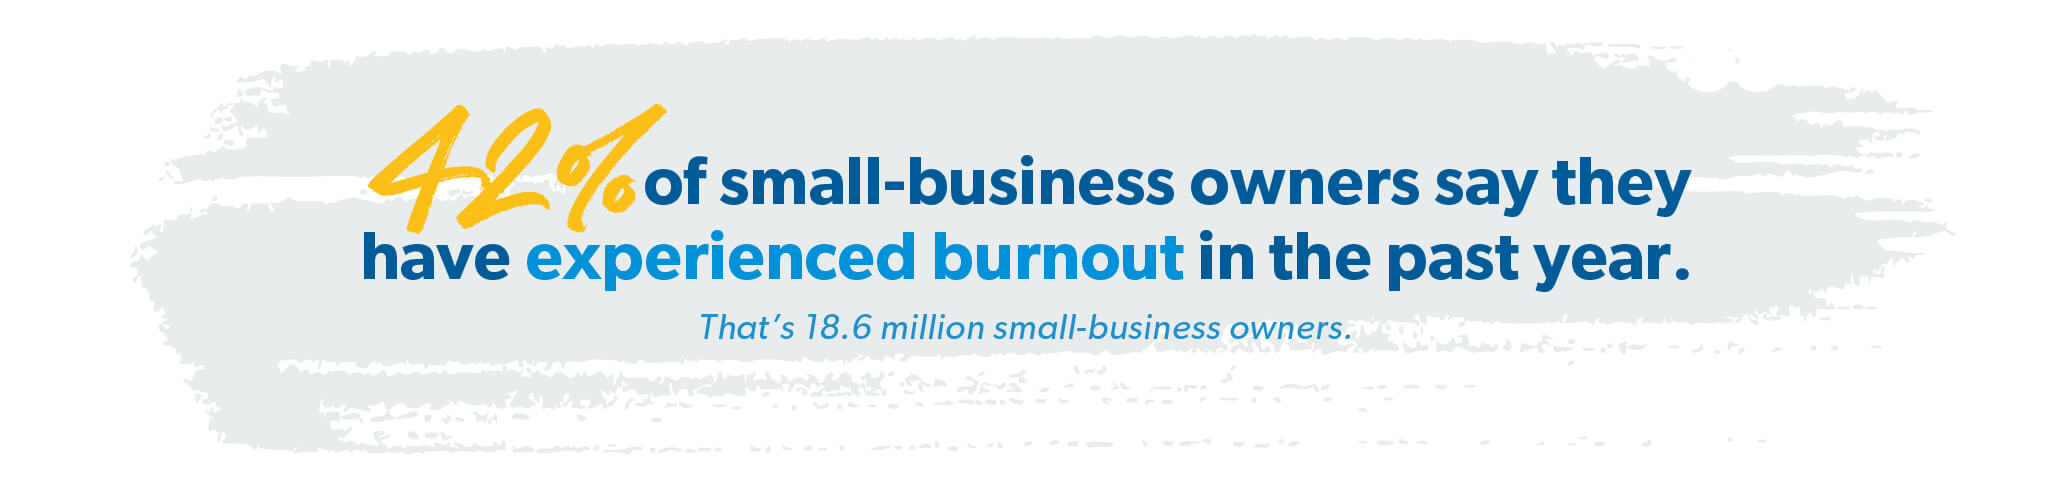 42% of small-business owners say they have experienced burnout in the past year